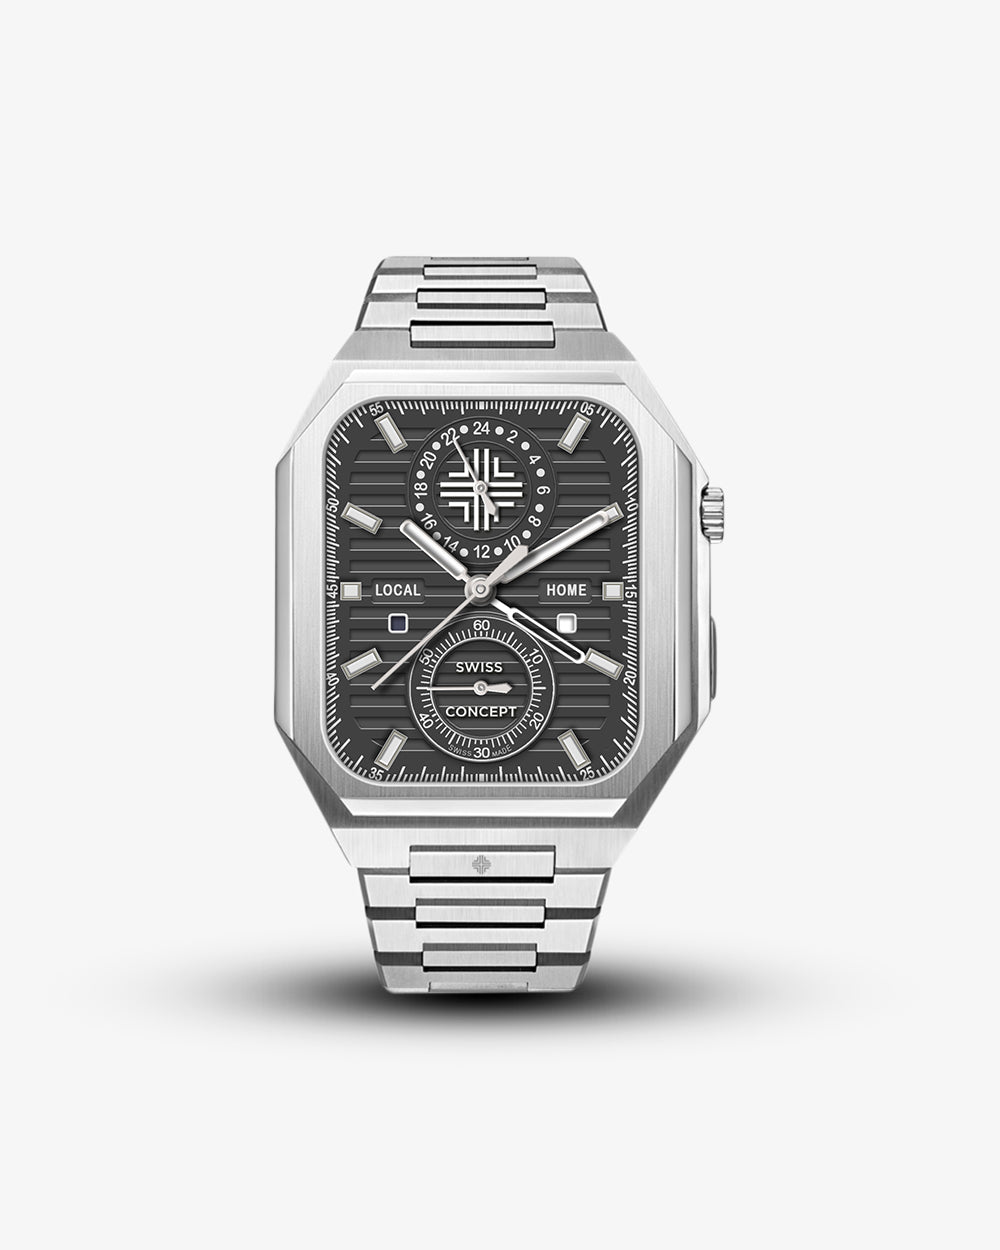 Swiss Concept Nautical Classic Edition Stainless Steel Apple Watch Case - Swiss Design